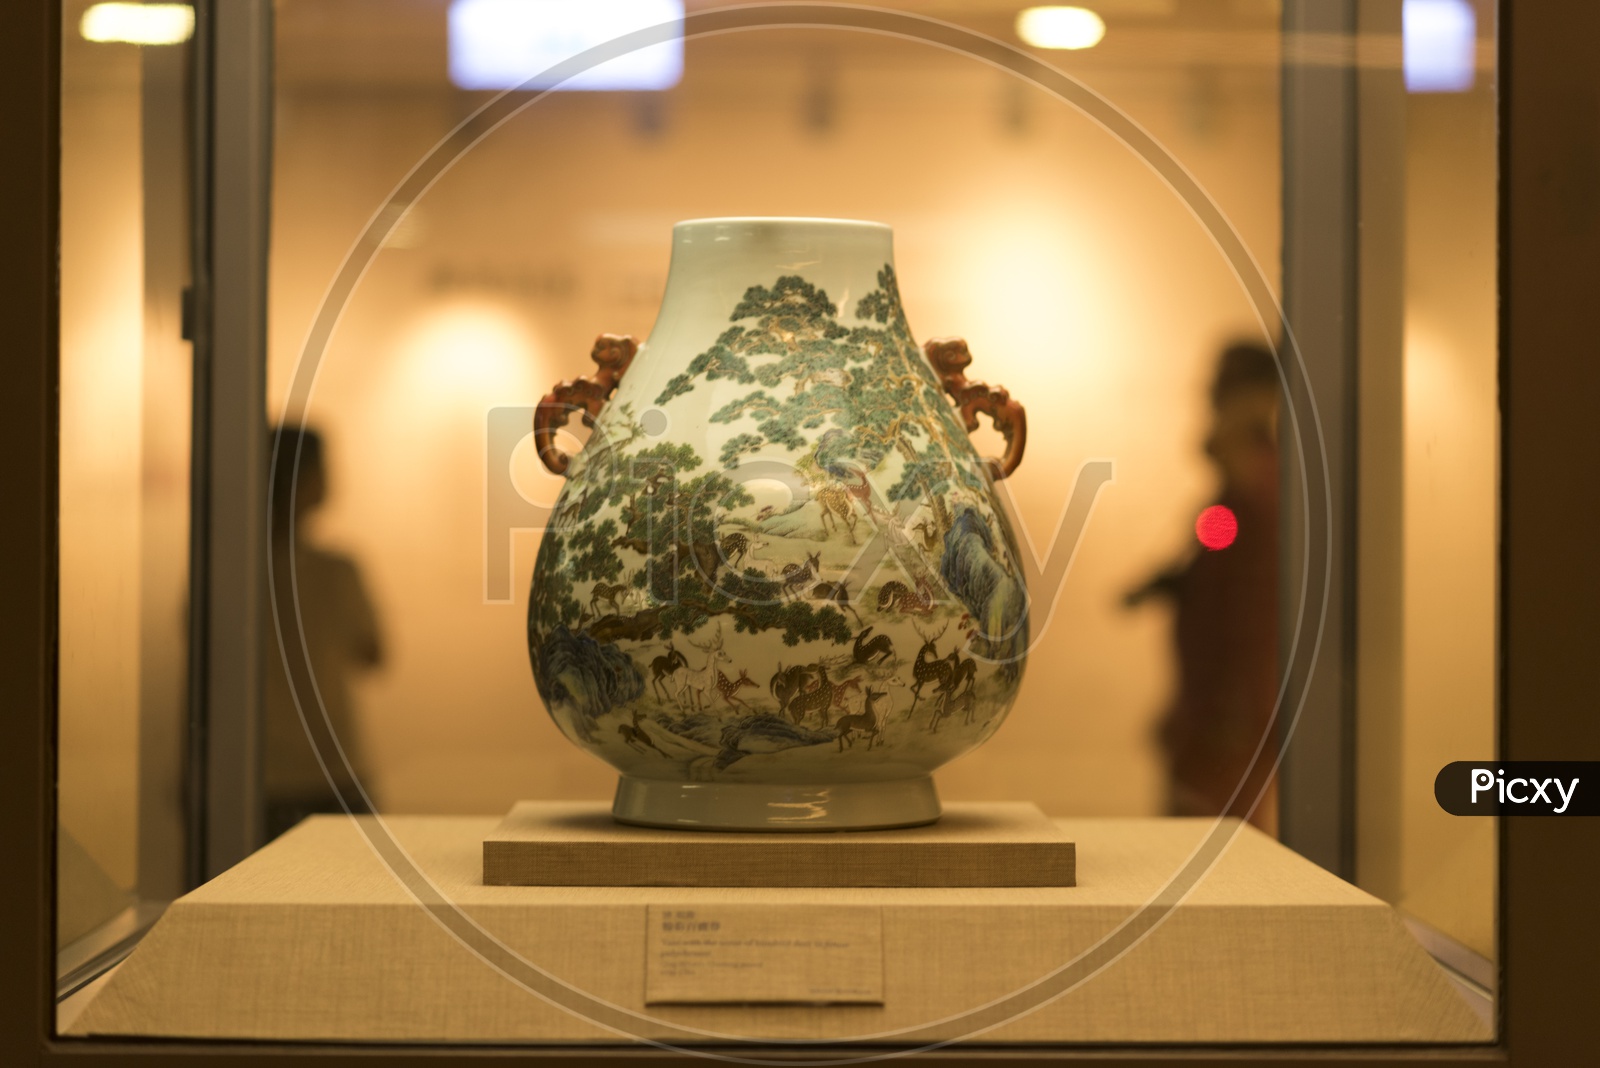 Antique Vase  In Display At  Taipei's National Palace Museum